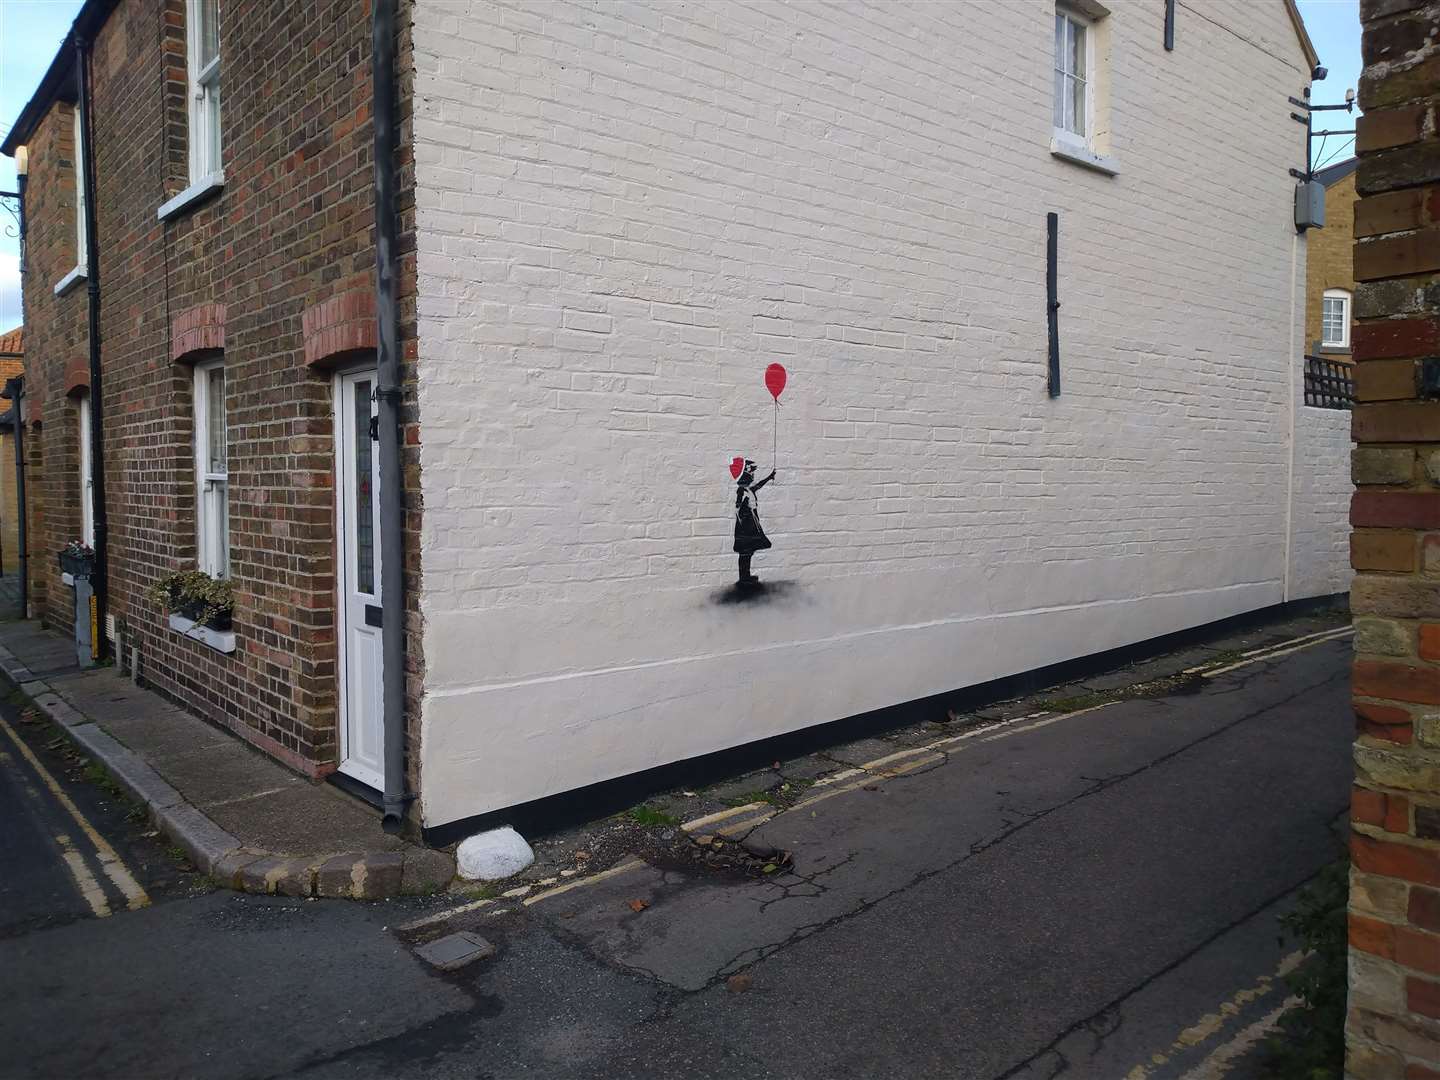 The piece in Sandwich resembles Banksy's famous 'Girl With Balloon'